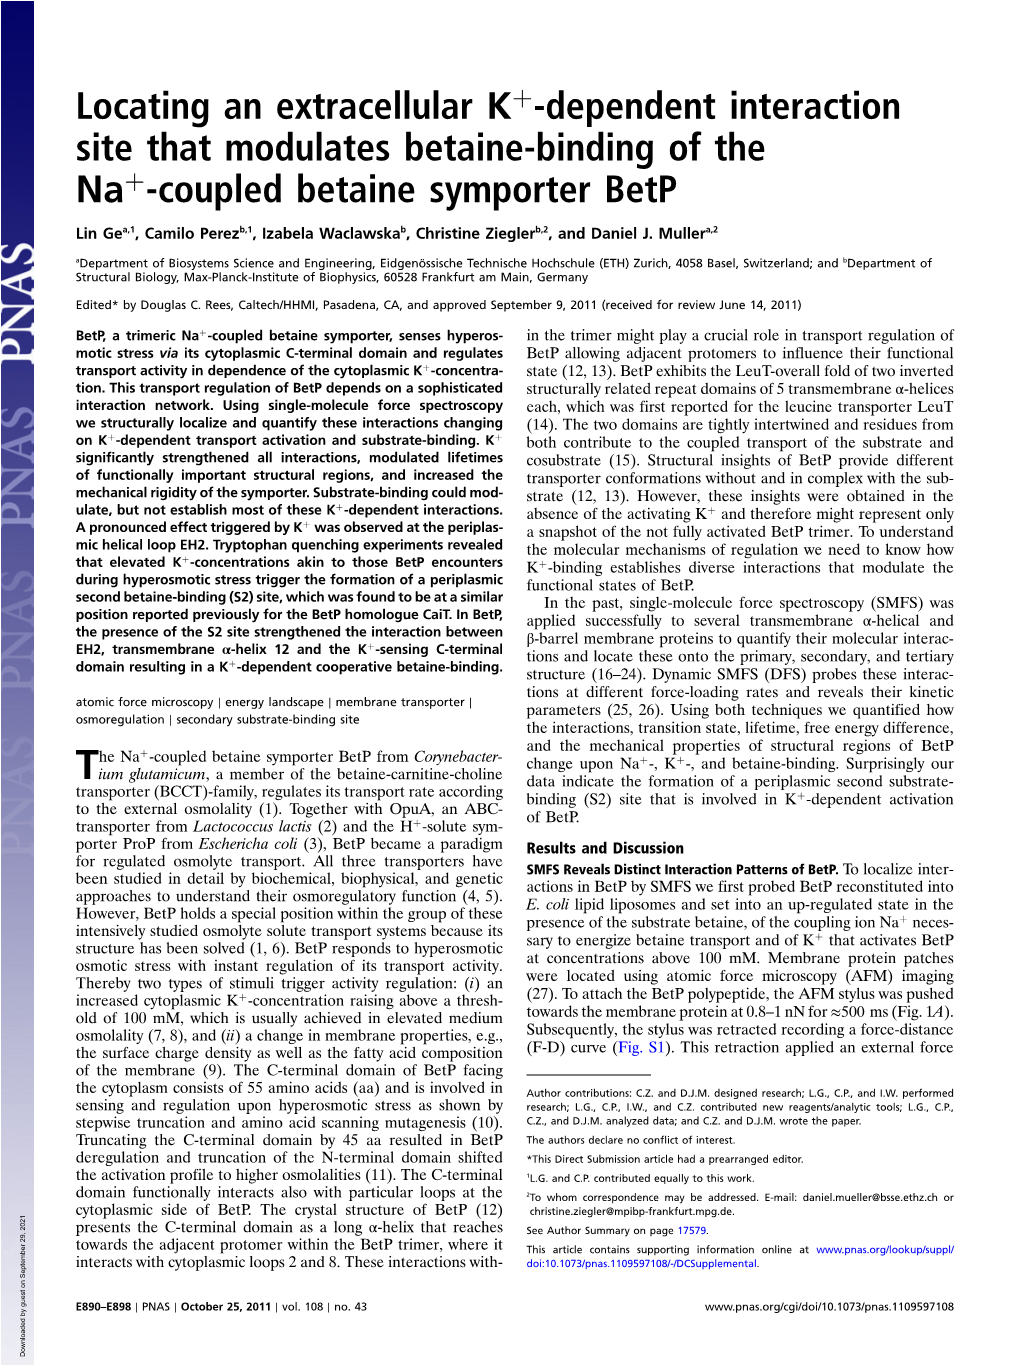 Coupled Betaine Symporter Betp